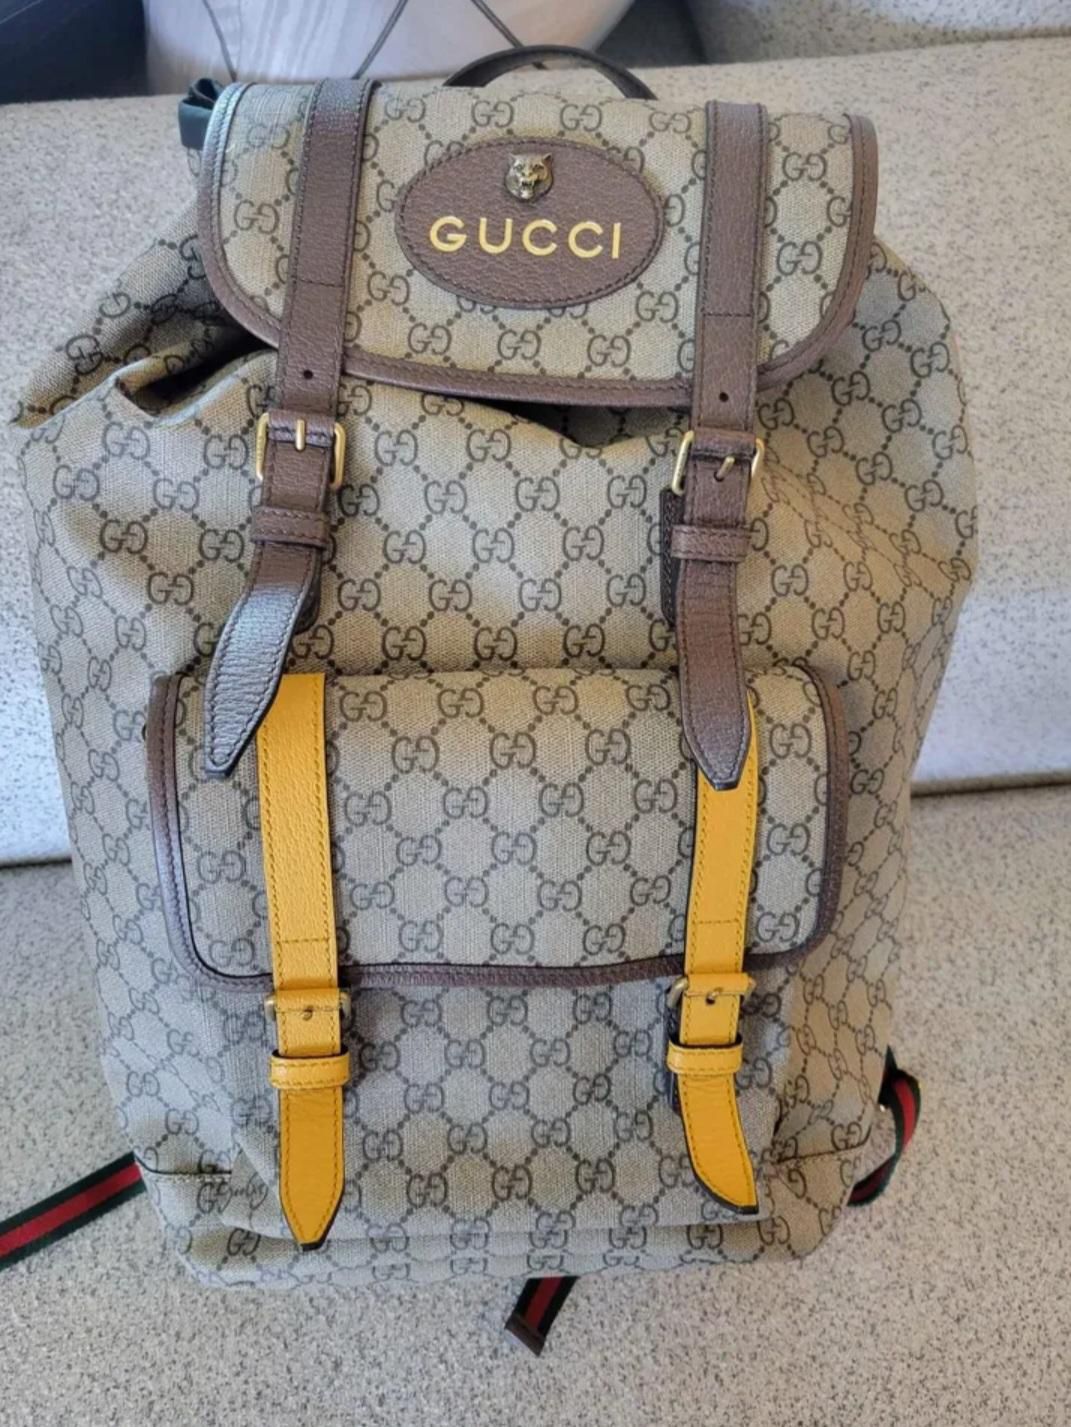 Gucci Black Sling Backpack for Sale in Tolleson, AZ - OfferUp